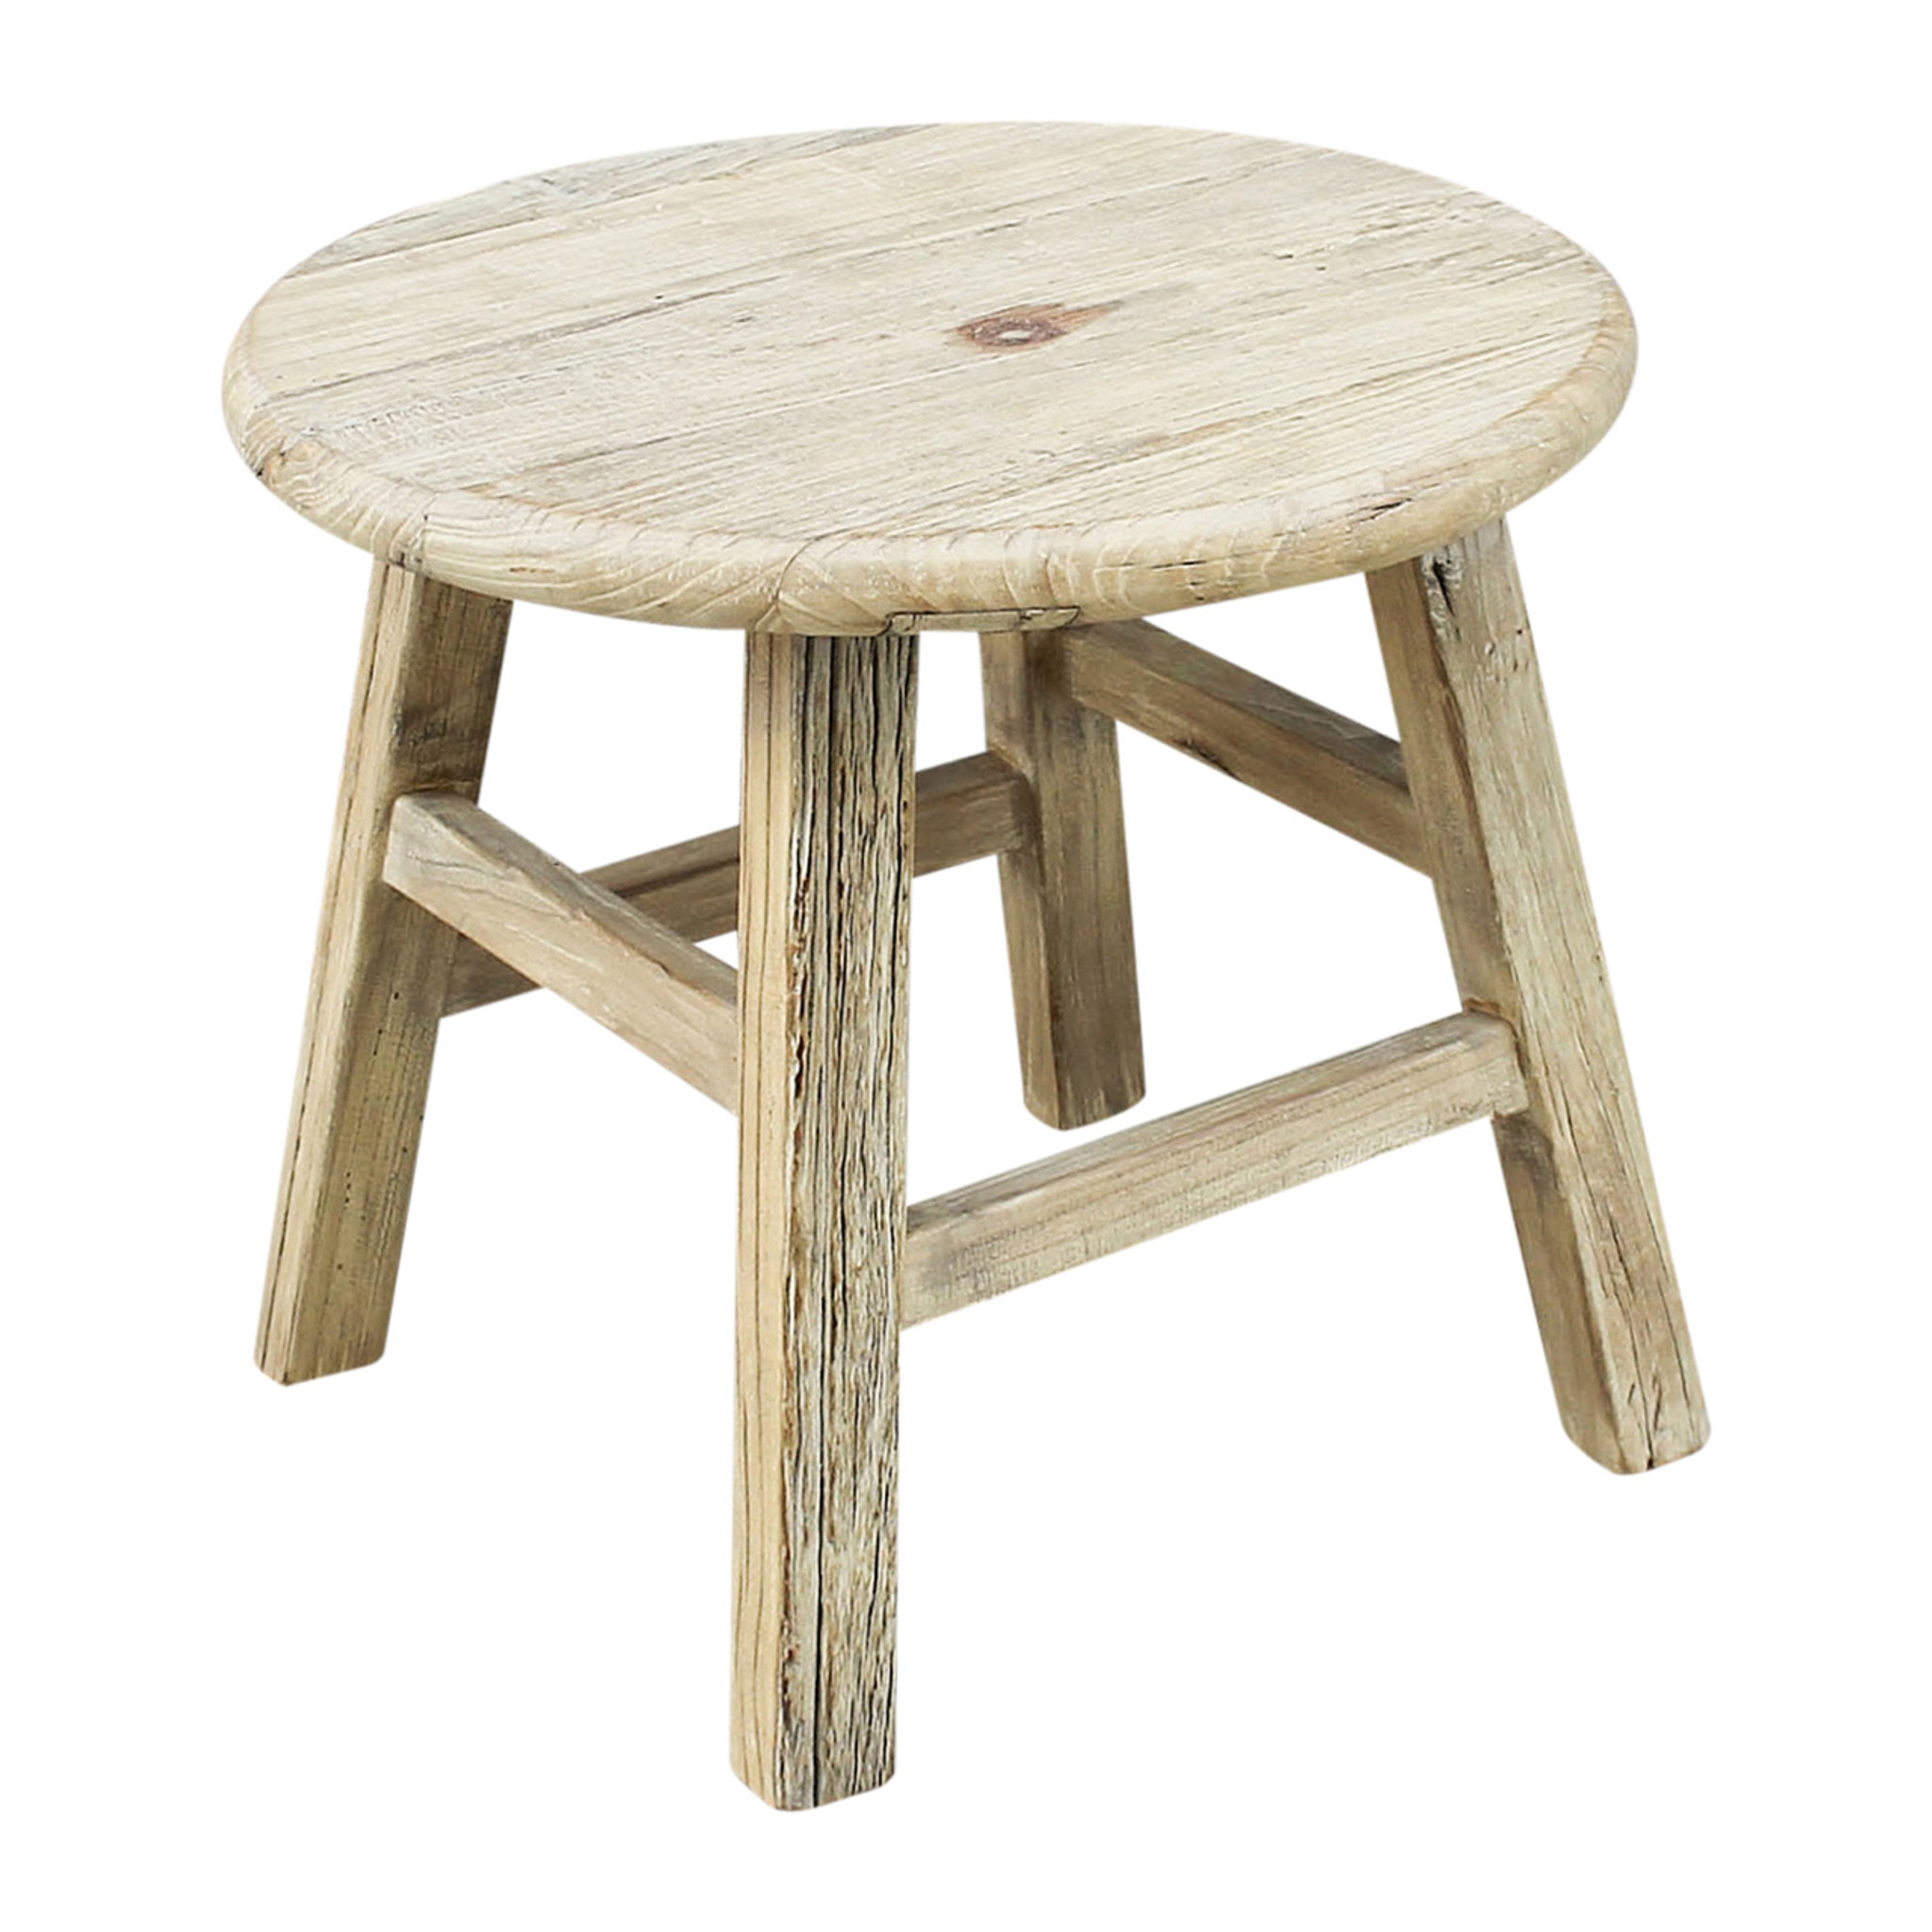 Occasional Table Stool Est20 Stone Pony